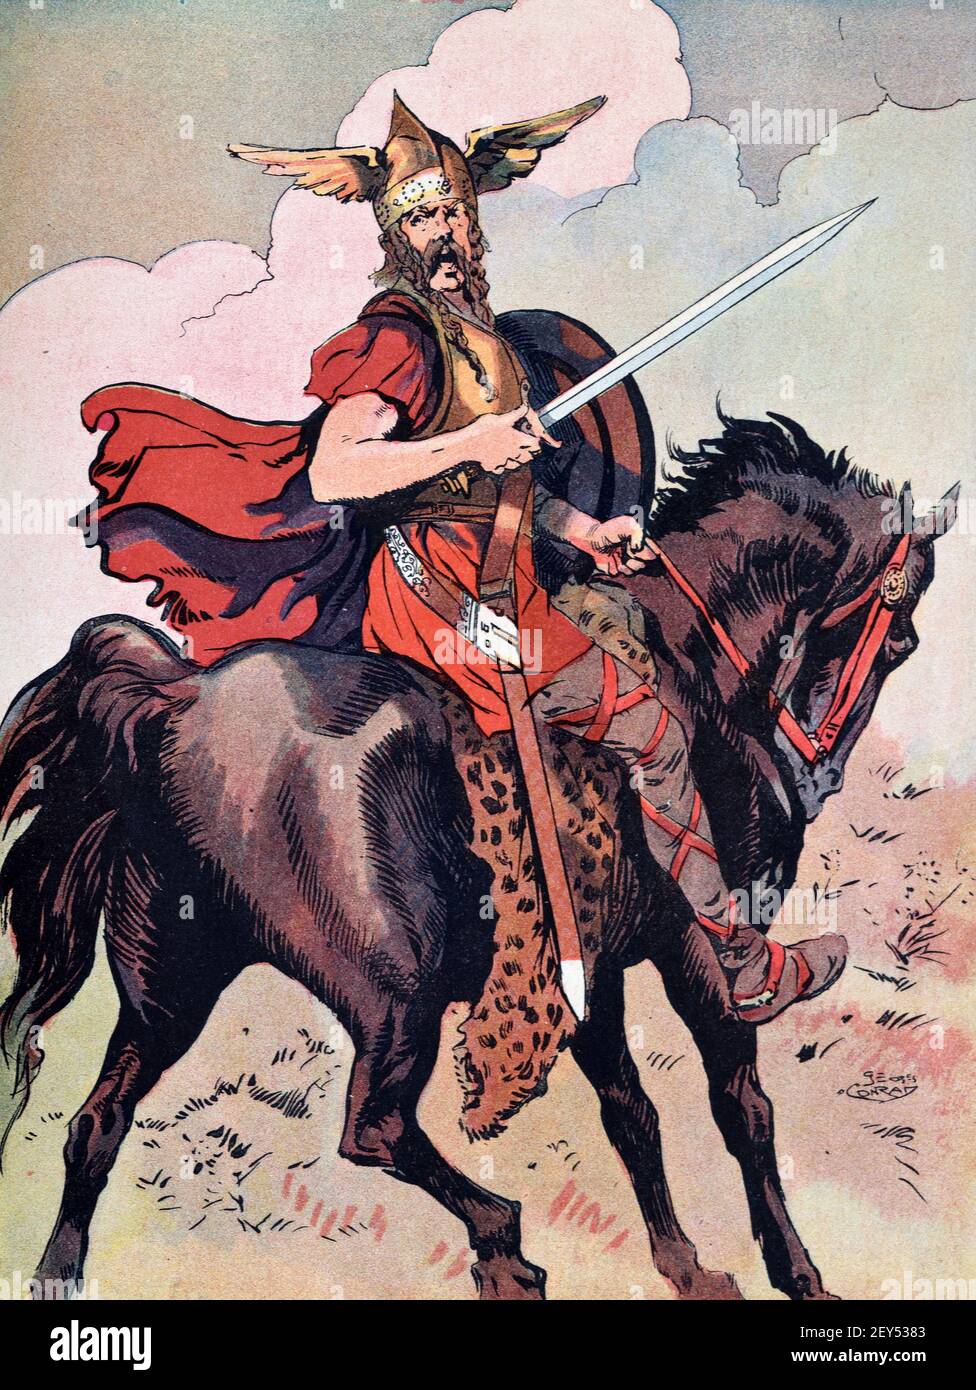 Vercingetorix (c82BC-46BC) Leader, King or Chieftain of the Gallic Arveni Tribe on Horseback & Dressed as a Gallic Warrior with Feathered Helmet, Sword & Shield, Ancient Gaul, now France. c1940 Vintage Illustration Stock Photo